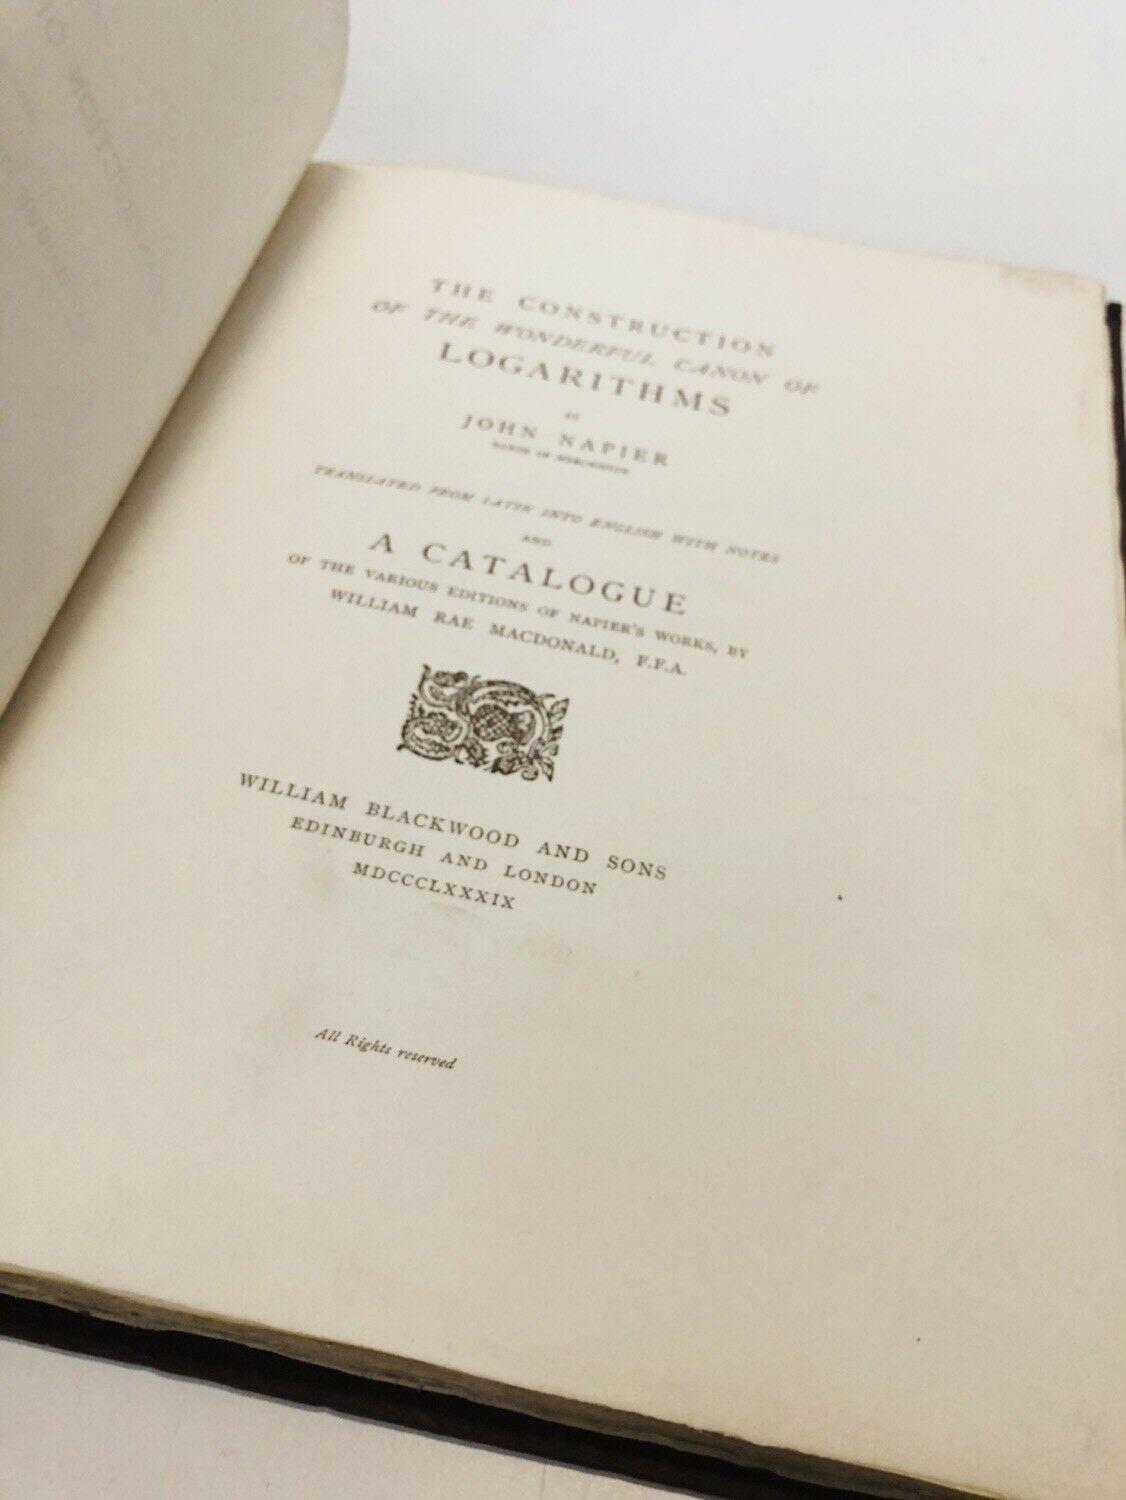 RARE The Construction of the Wonderful Canon of Logarithms (1889) LIMITED TO 250 COPIES Mathematics